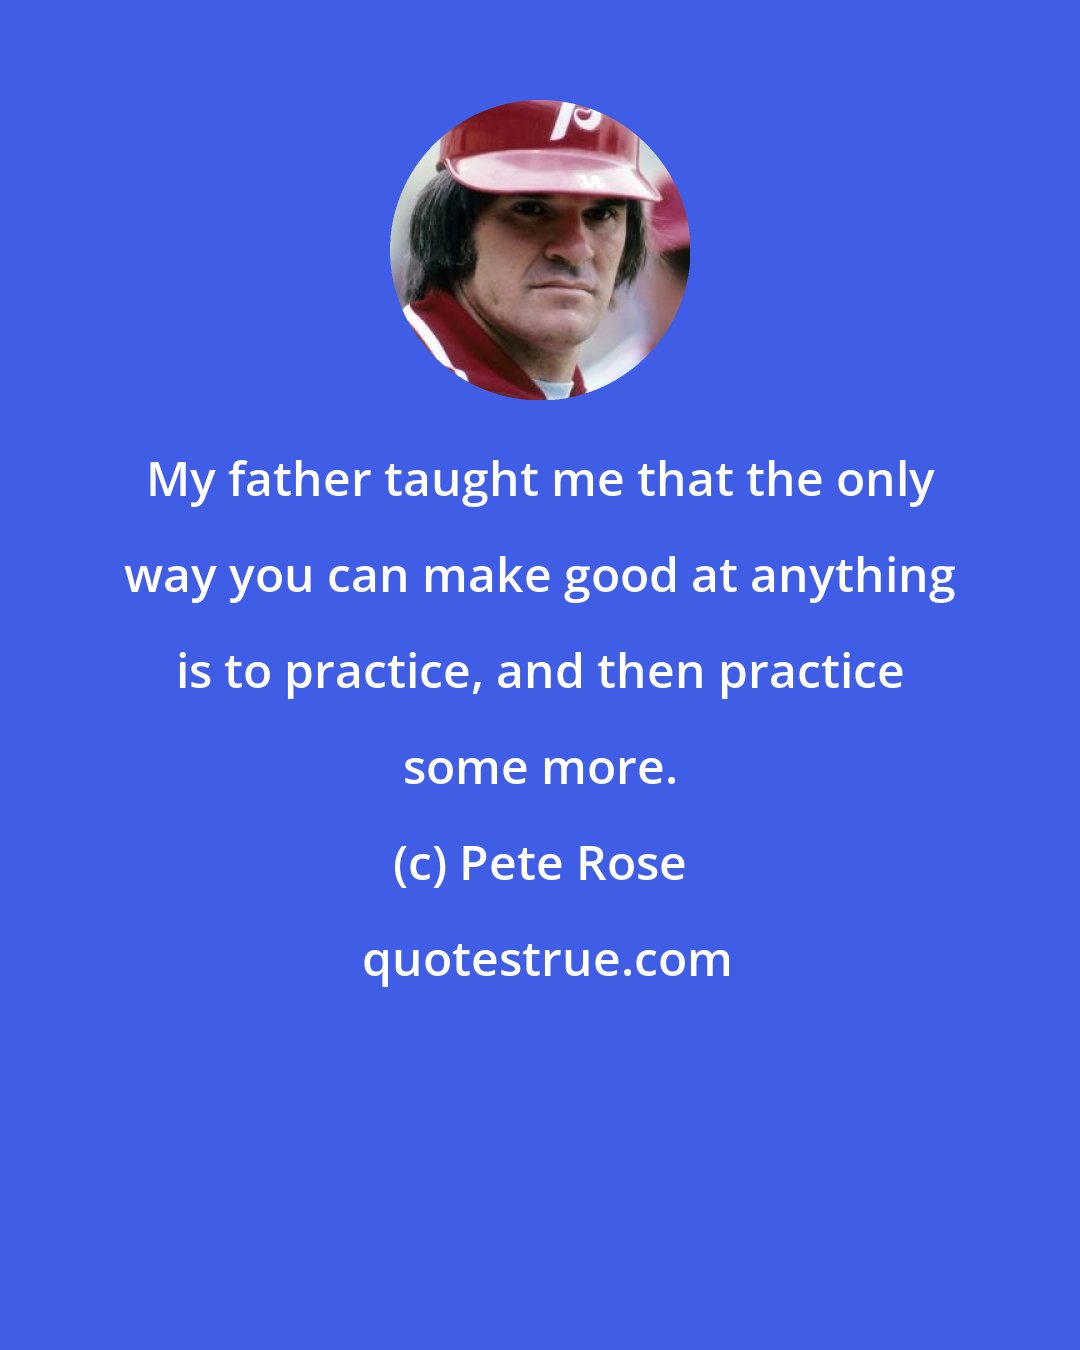 Pete Rose: My father taught me that the only way you can make good at anything is to practice, and then practice some more.